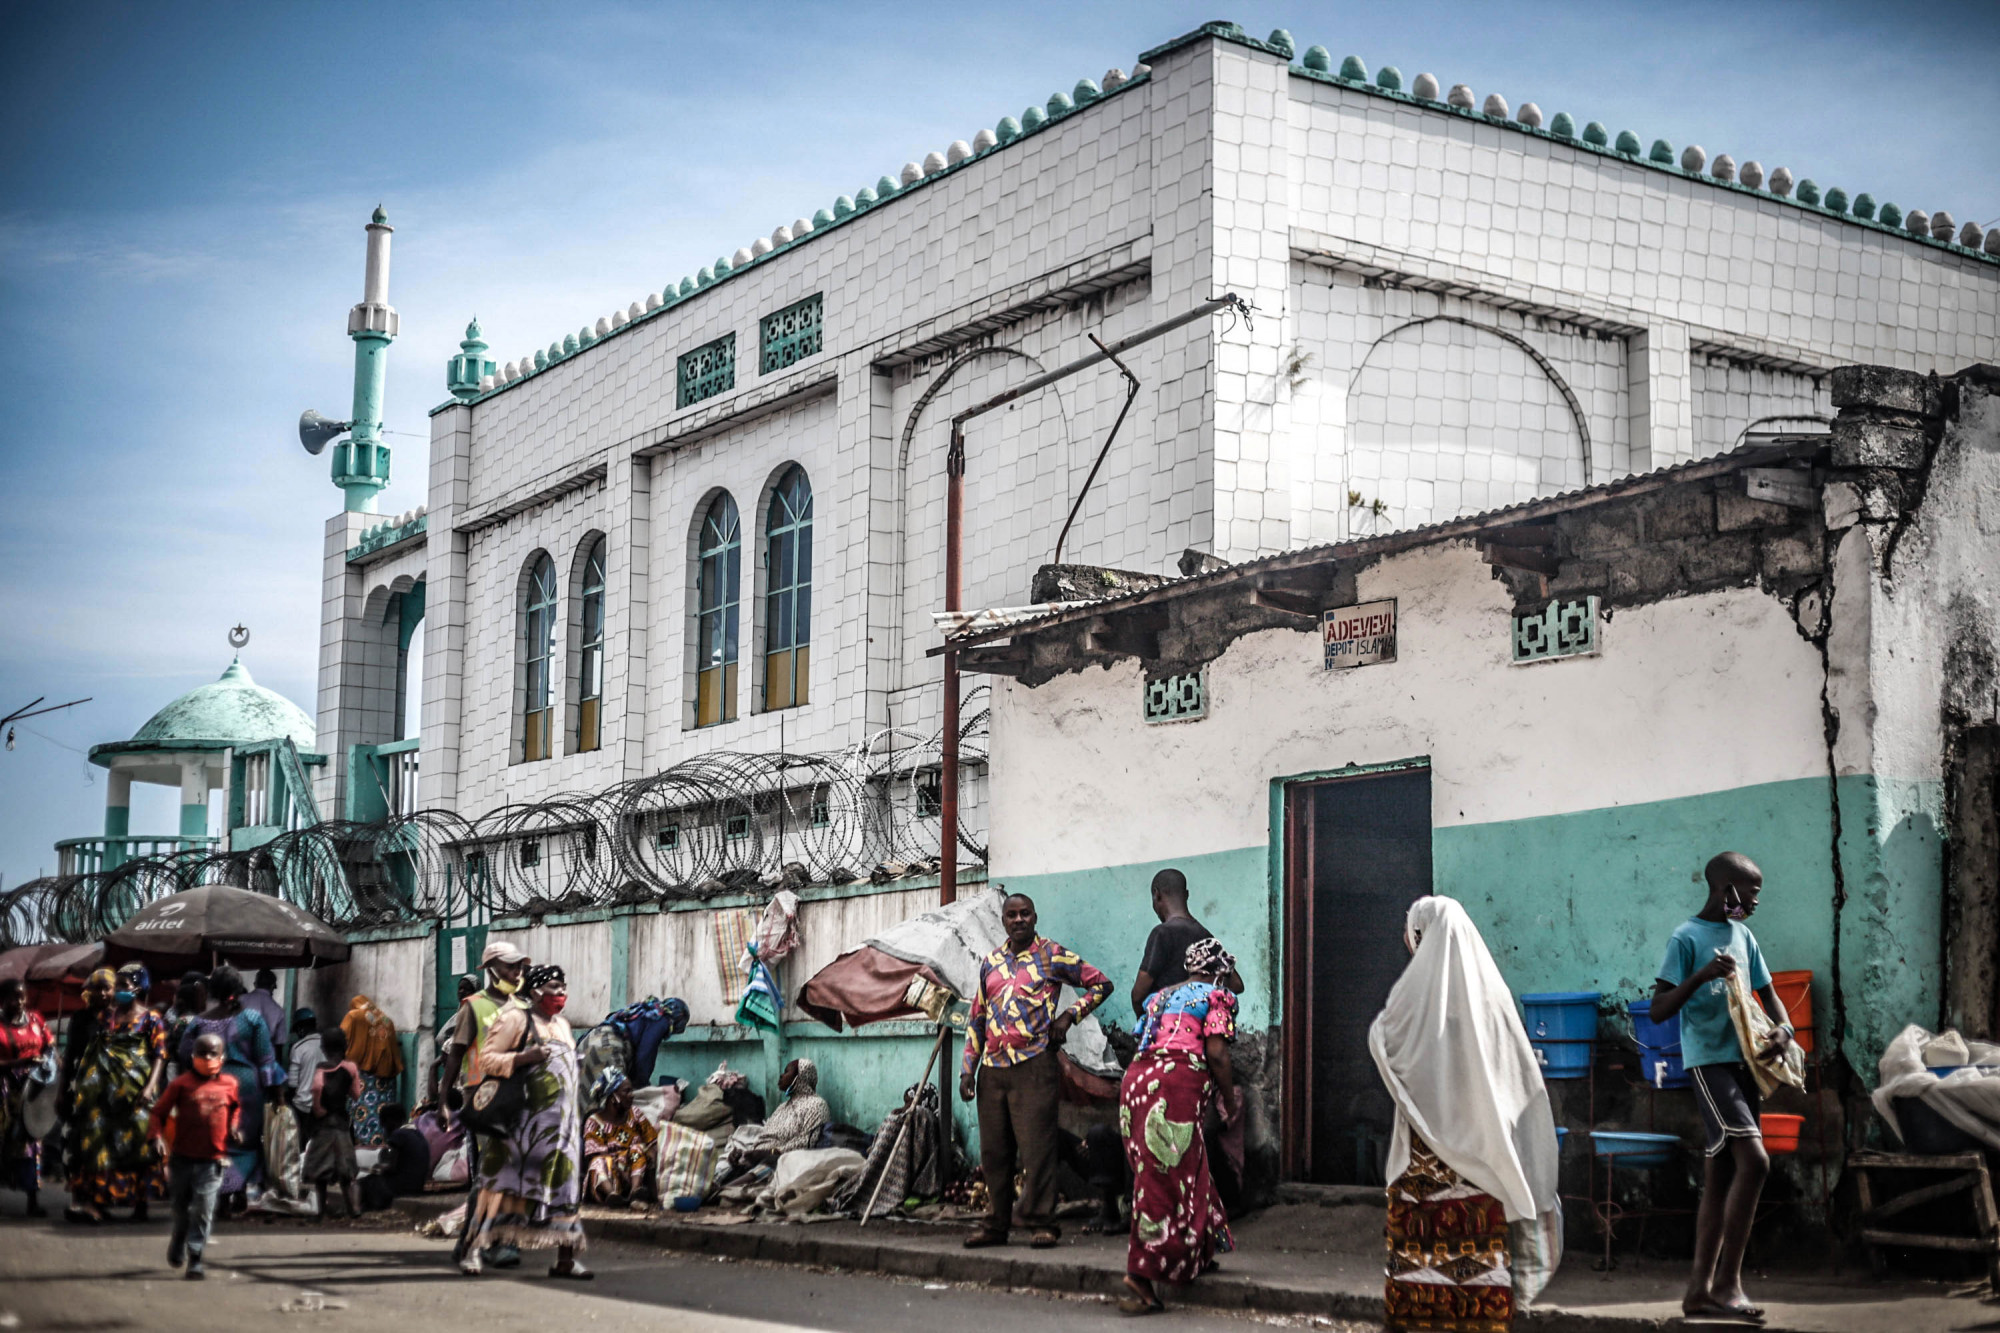 Goma, DRC May 2020. With religious centres, including the Birere mosque, closed under Congo’s coronavirus lockdown, members of the muslim community in the eastern Congolese city of Goma passed the holy month of Ramadan at home.  © Ley Uwera for Fondation Carmignac